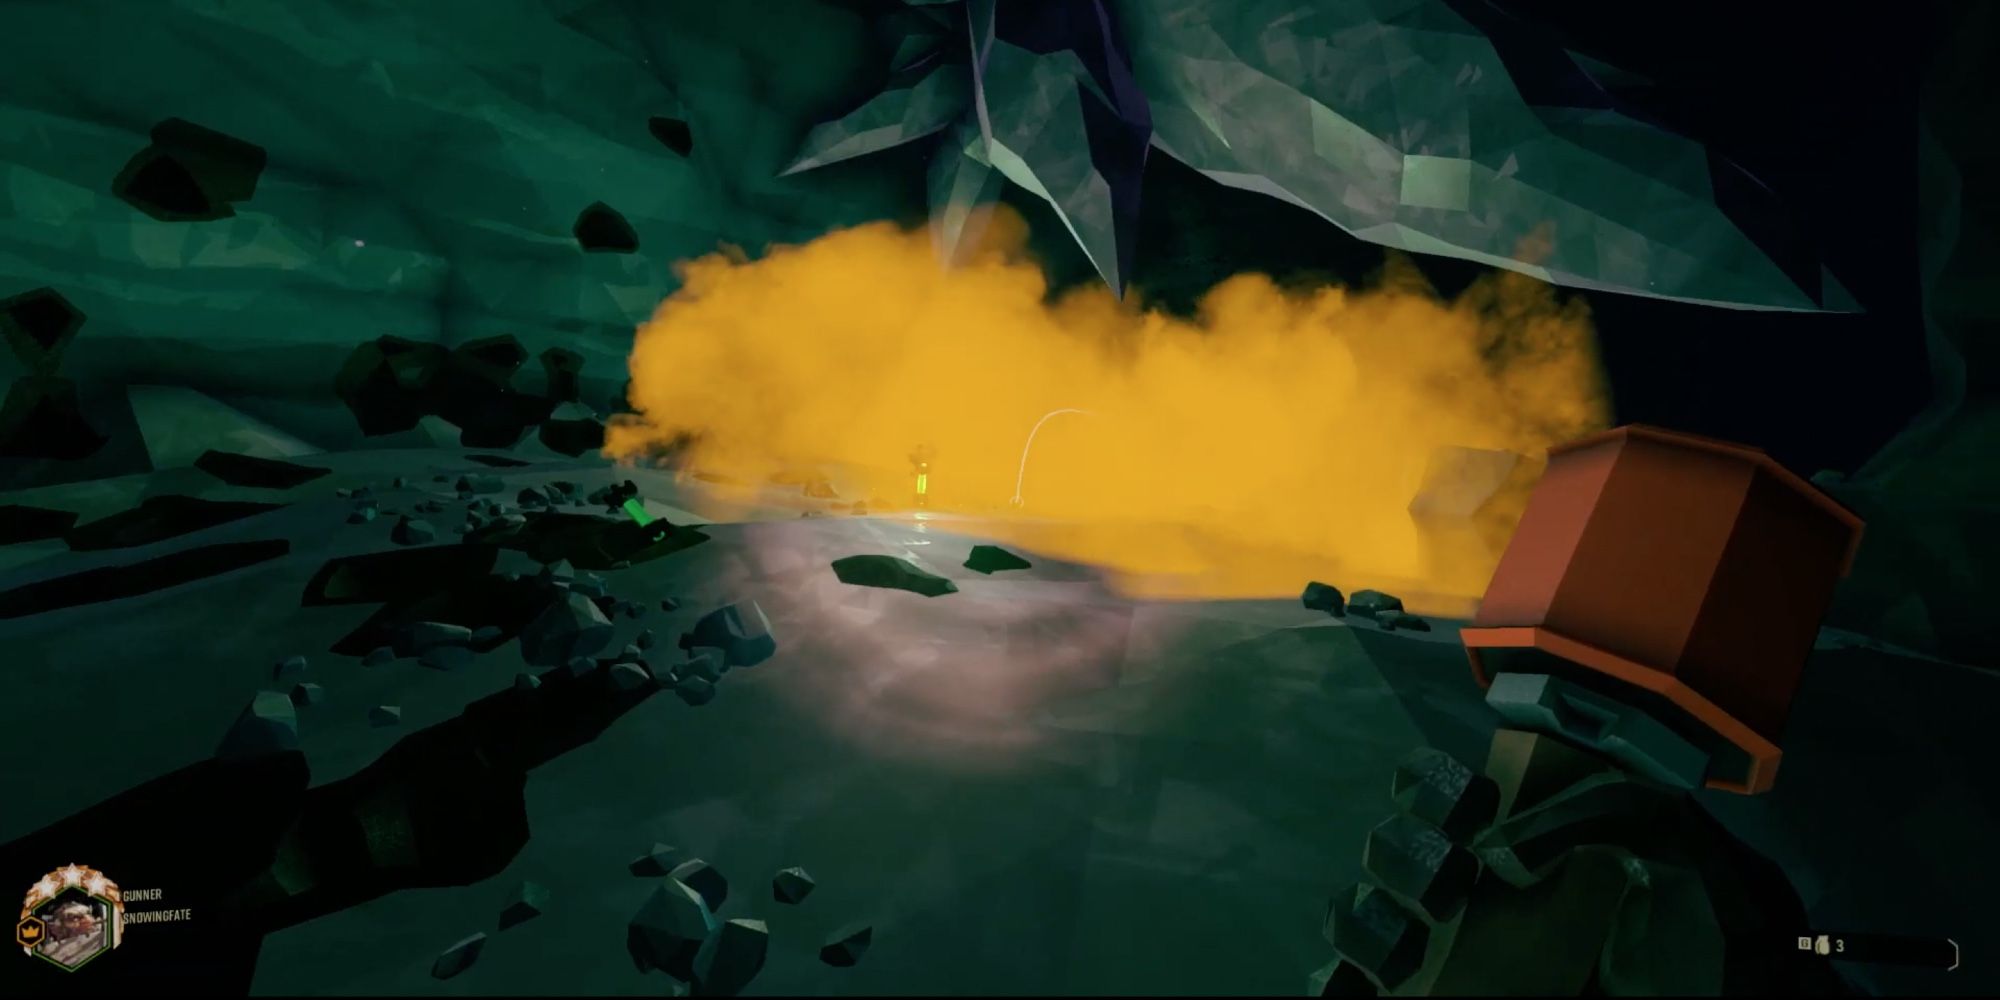 Deep Rock Galactic - Neurotoxin Grenade - Player releases poisonous gas from explosive